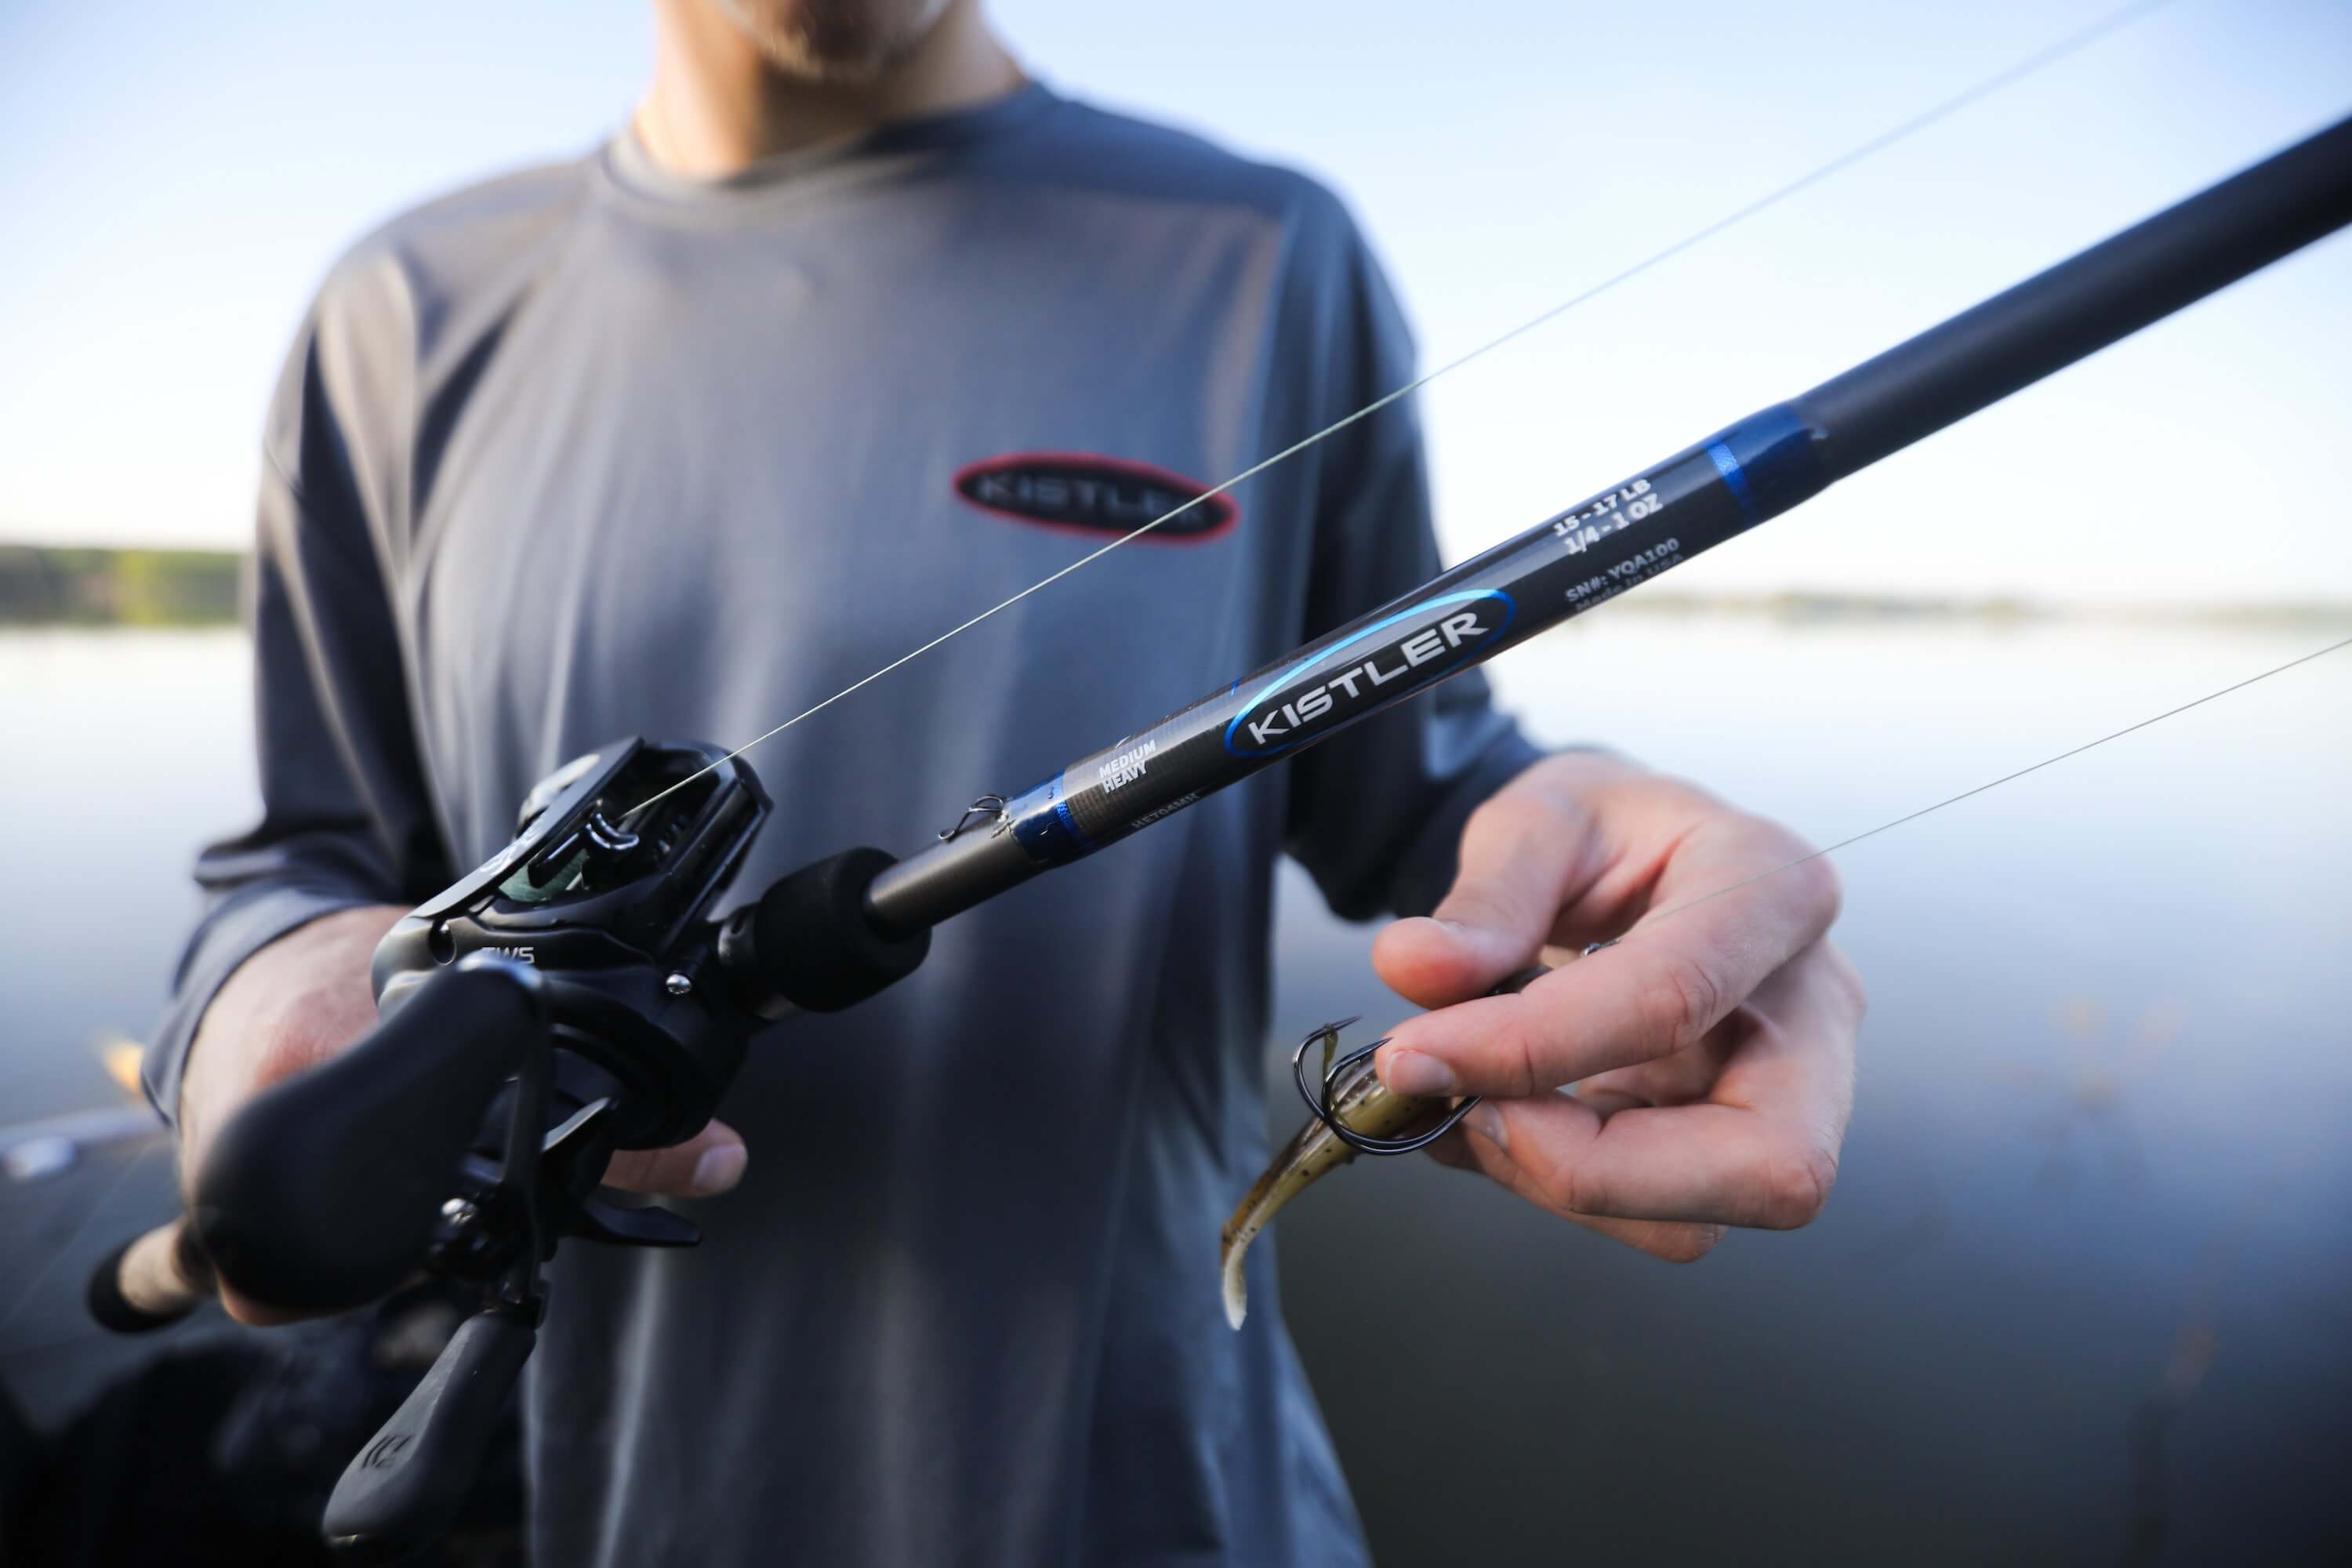 Building Custom Fishing Rods For Over 20 Years - Find Your New Favorite Fishing Rod Today